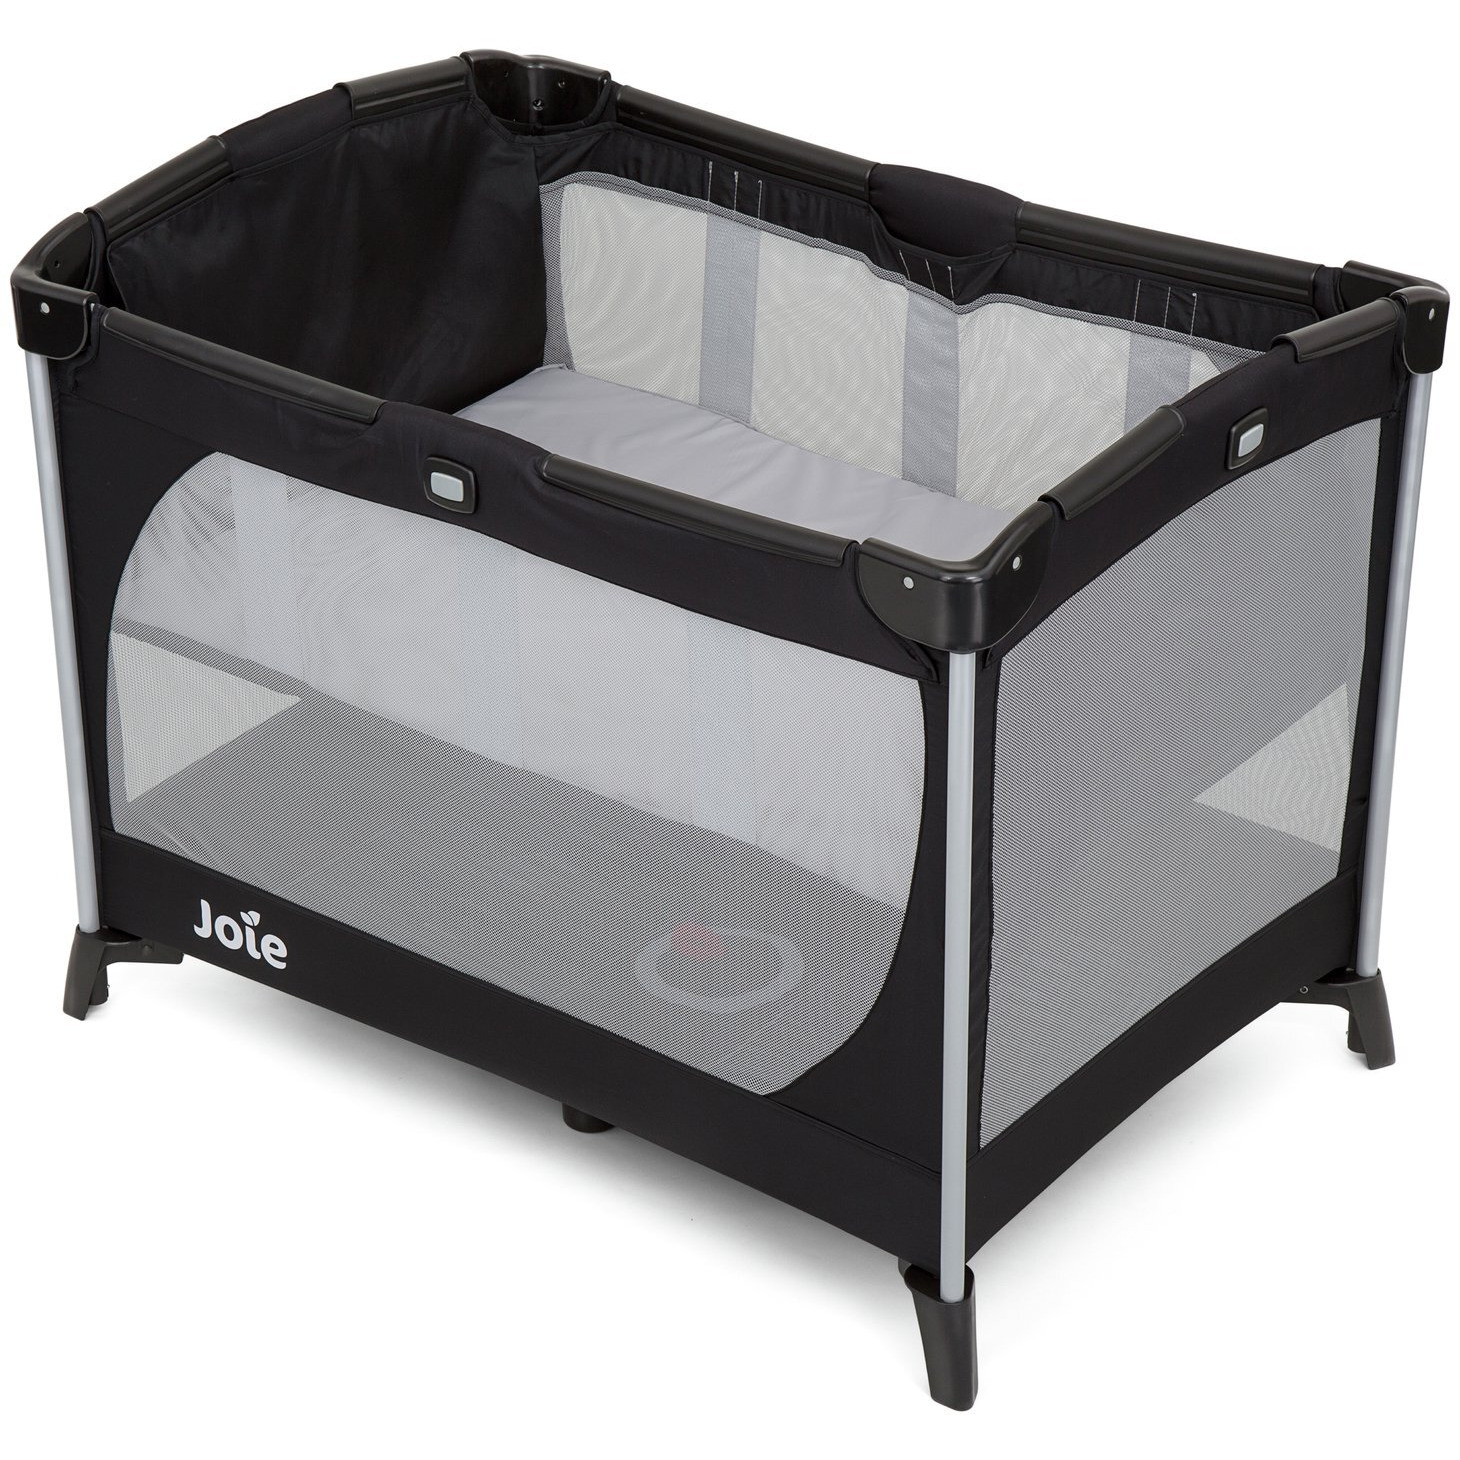 Joie Allura Travel Cot with Bassinet - image 1